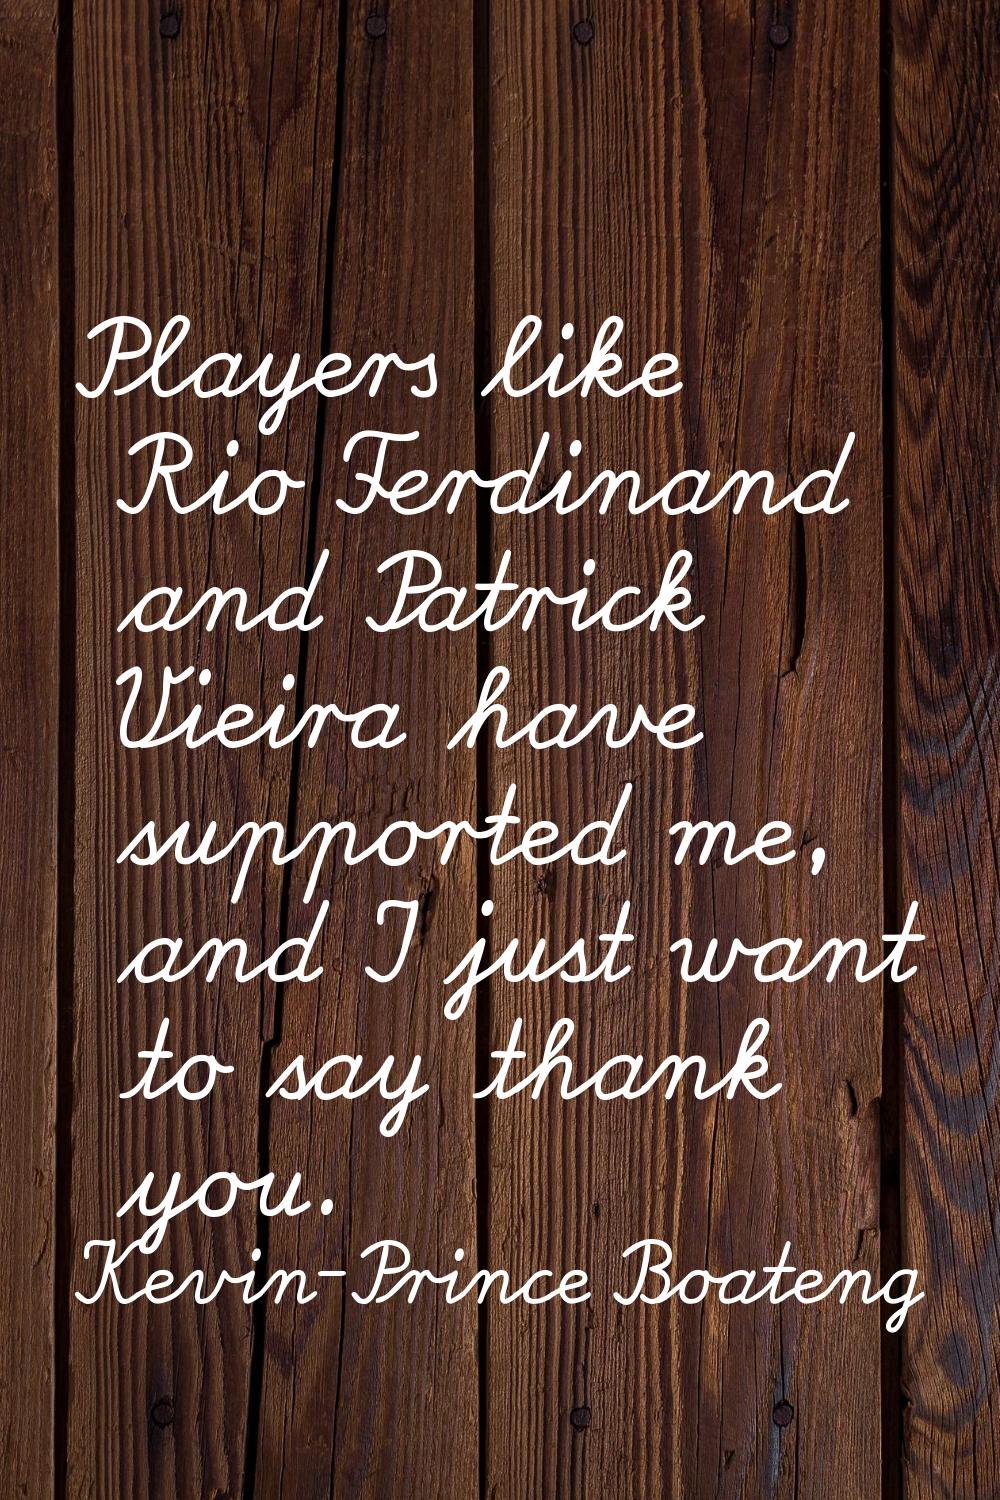 Players like Rio Ferdinand and Patrick Vieira have supported me, and I just want to say thank you.